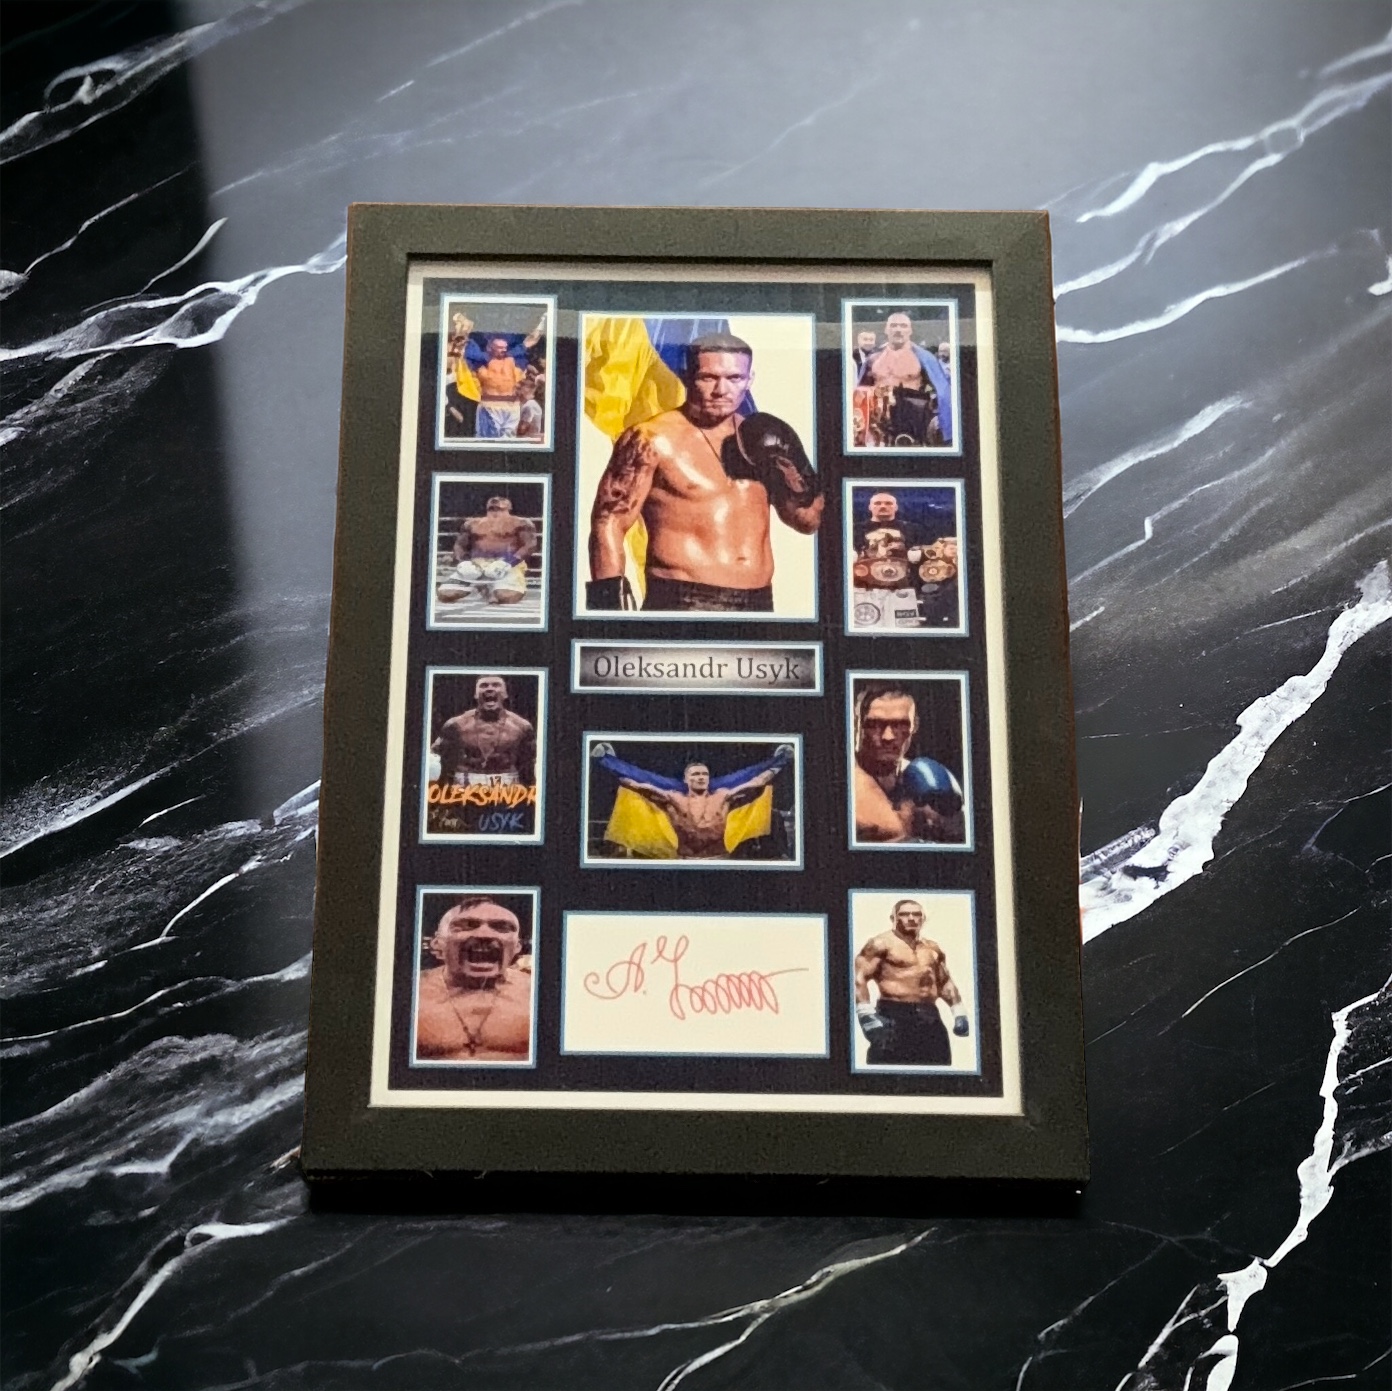 Oleksander Usyk 13x10 inch approx framed signature piece includes signed white card with 10 colour